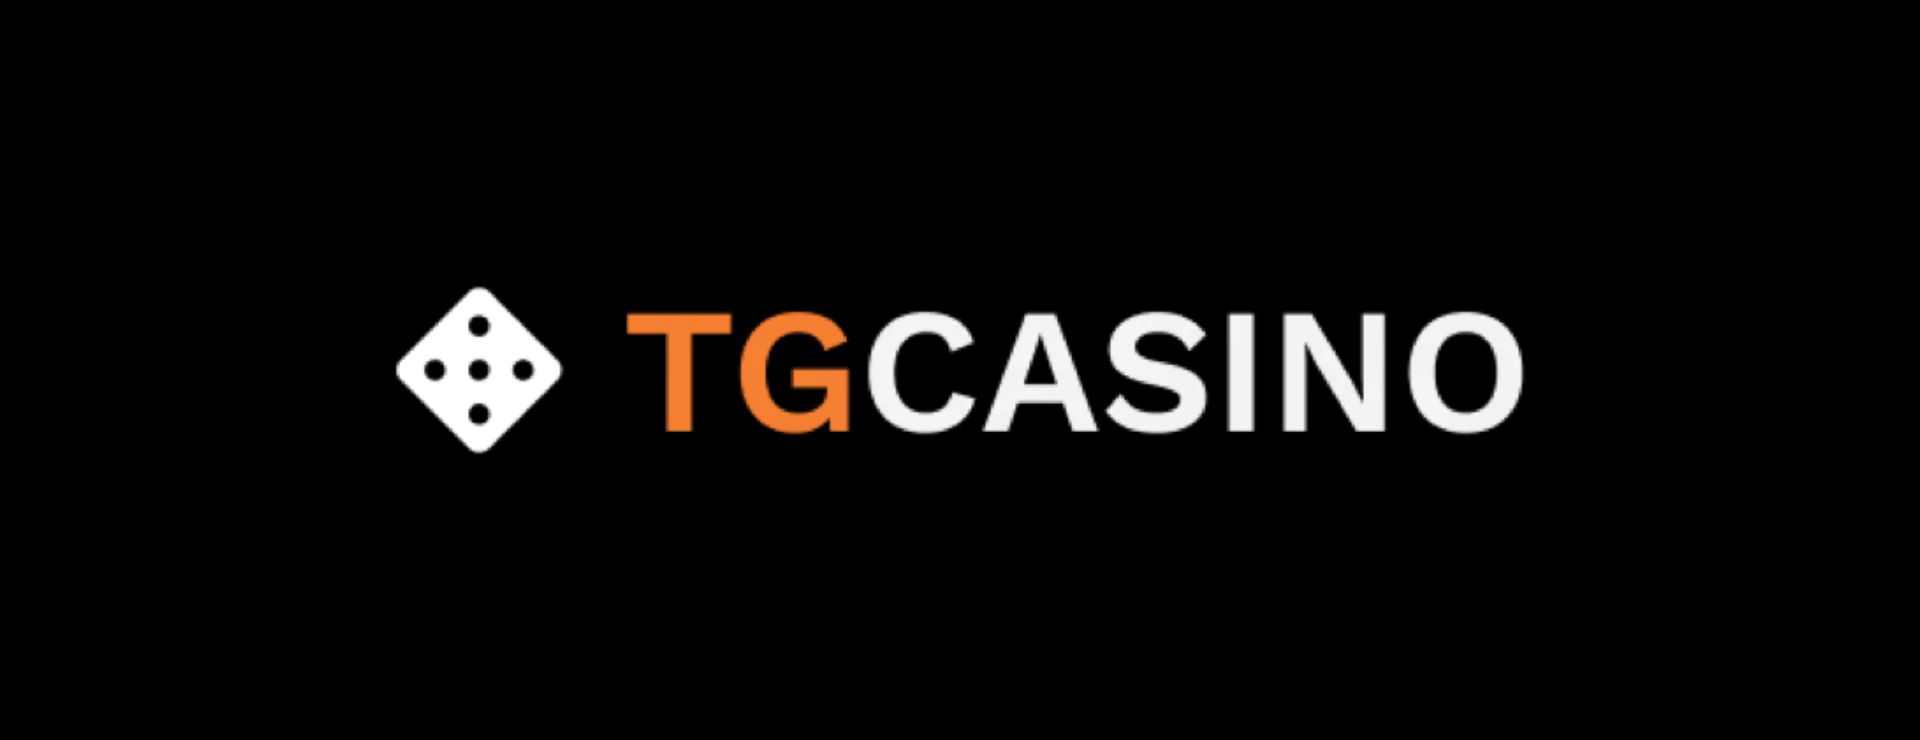 Crypto casino launches its own $TGC token